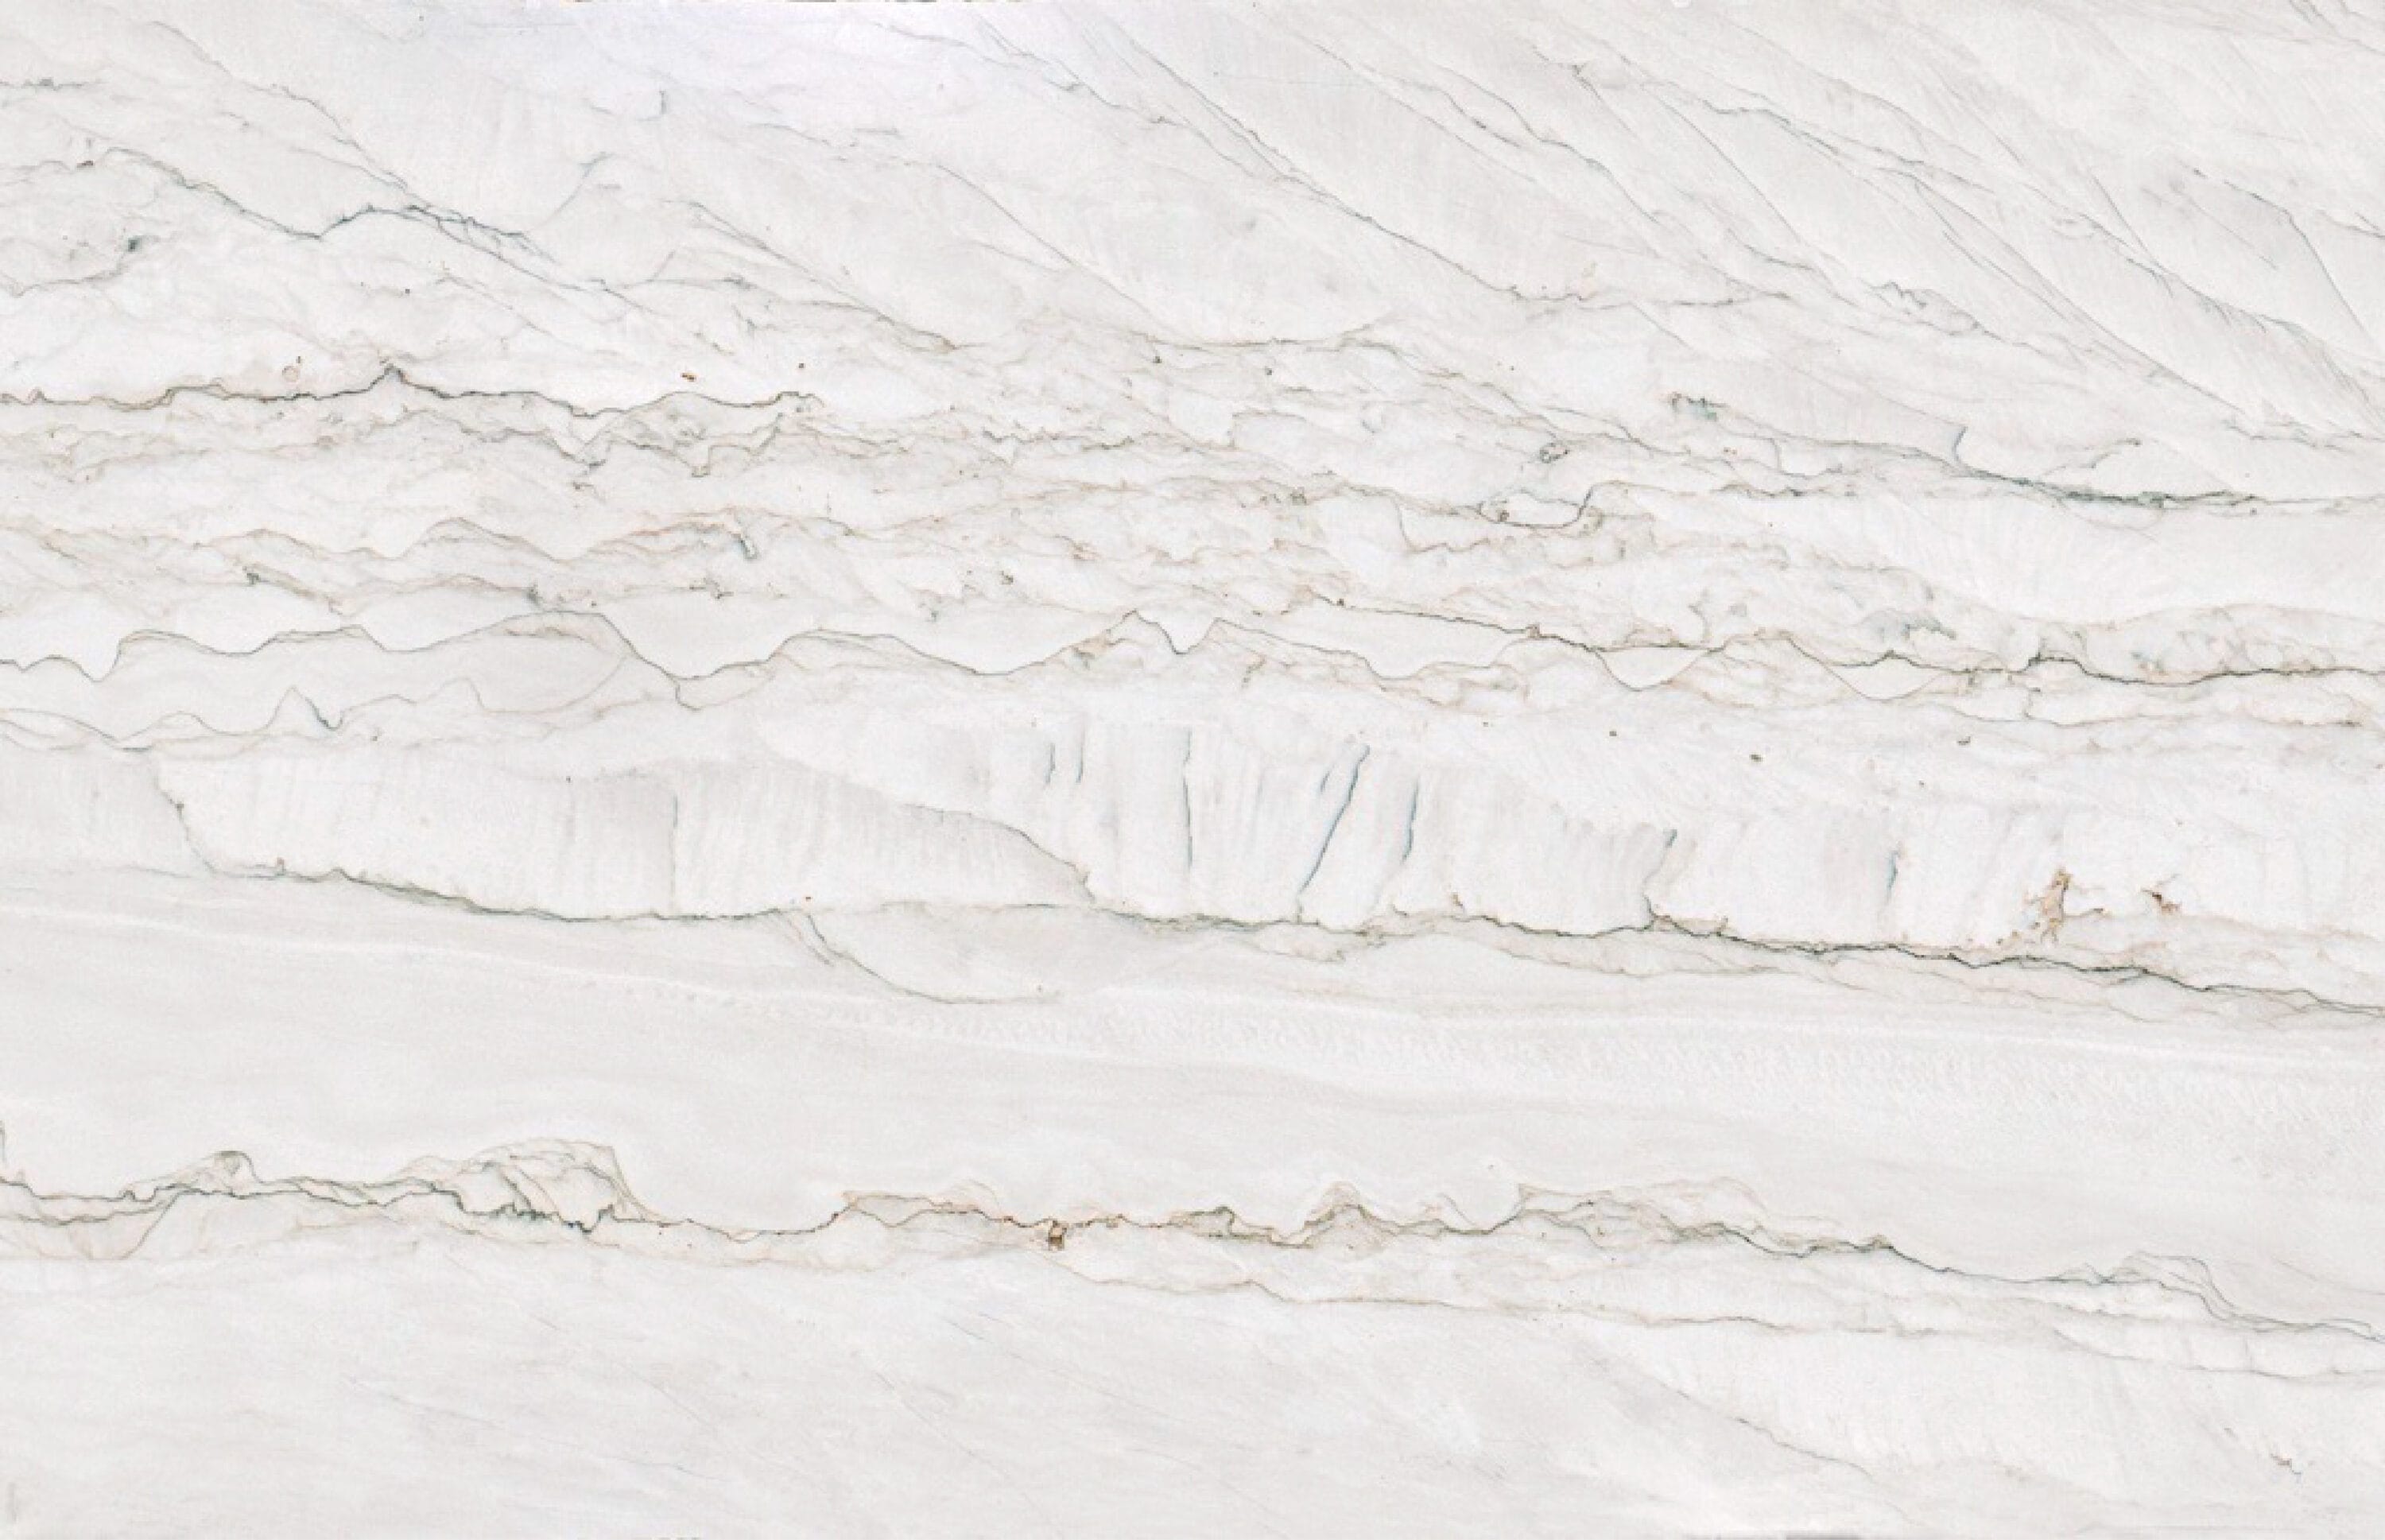 SenSa 4 In. X 4 In. Vancouver Quartzite Gray Kitchen Countertop SAMPLE  (4-in x 4-in) in the Kitchen Countertop Samples department at